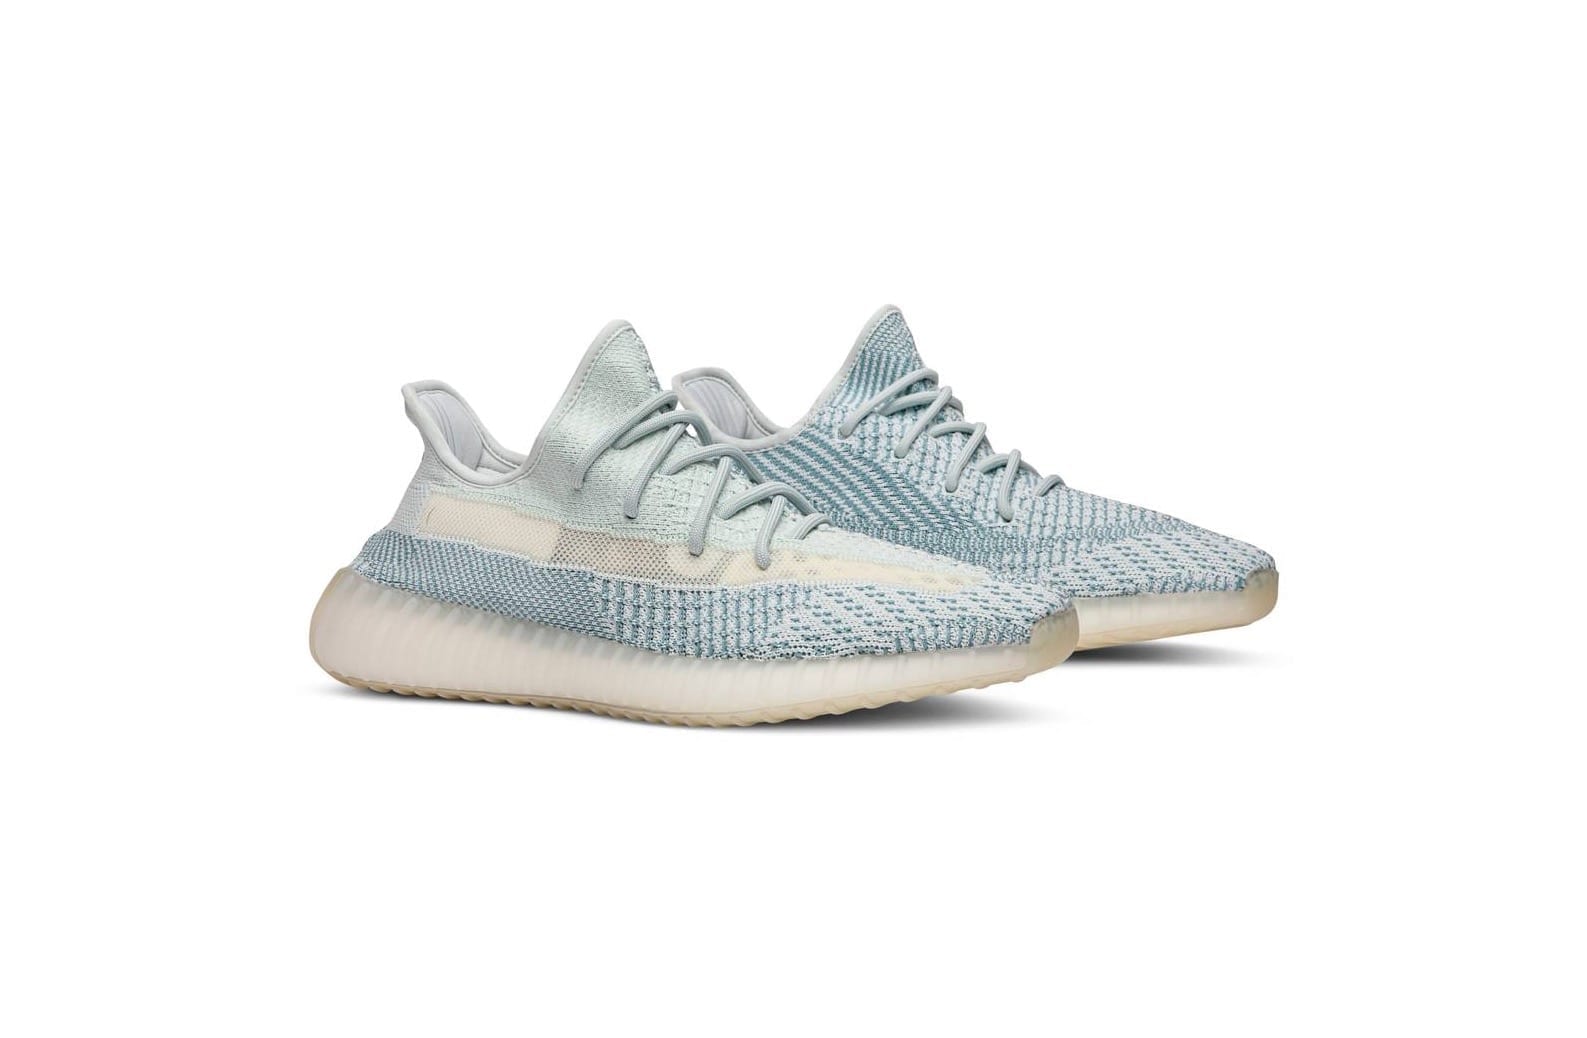 Adidas Yeezy Boost 350 V2 Cloud White Non-Reflective Yeezy